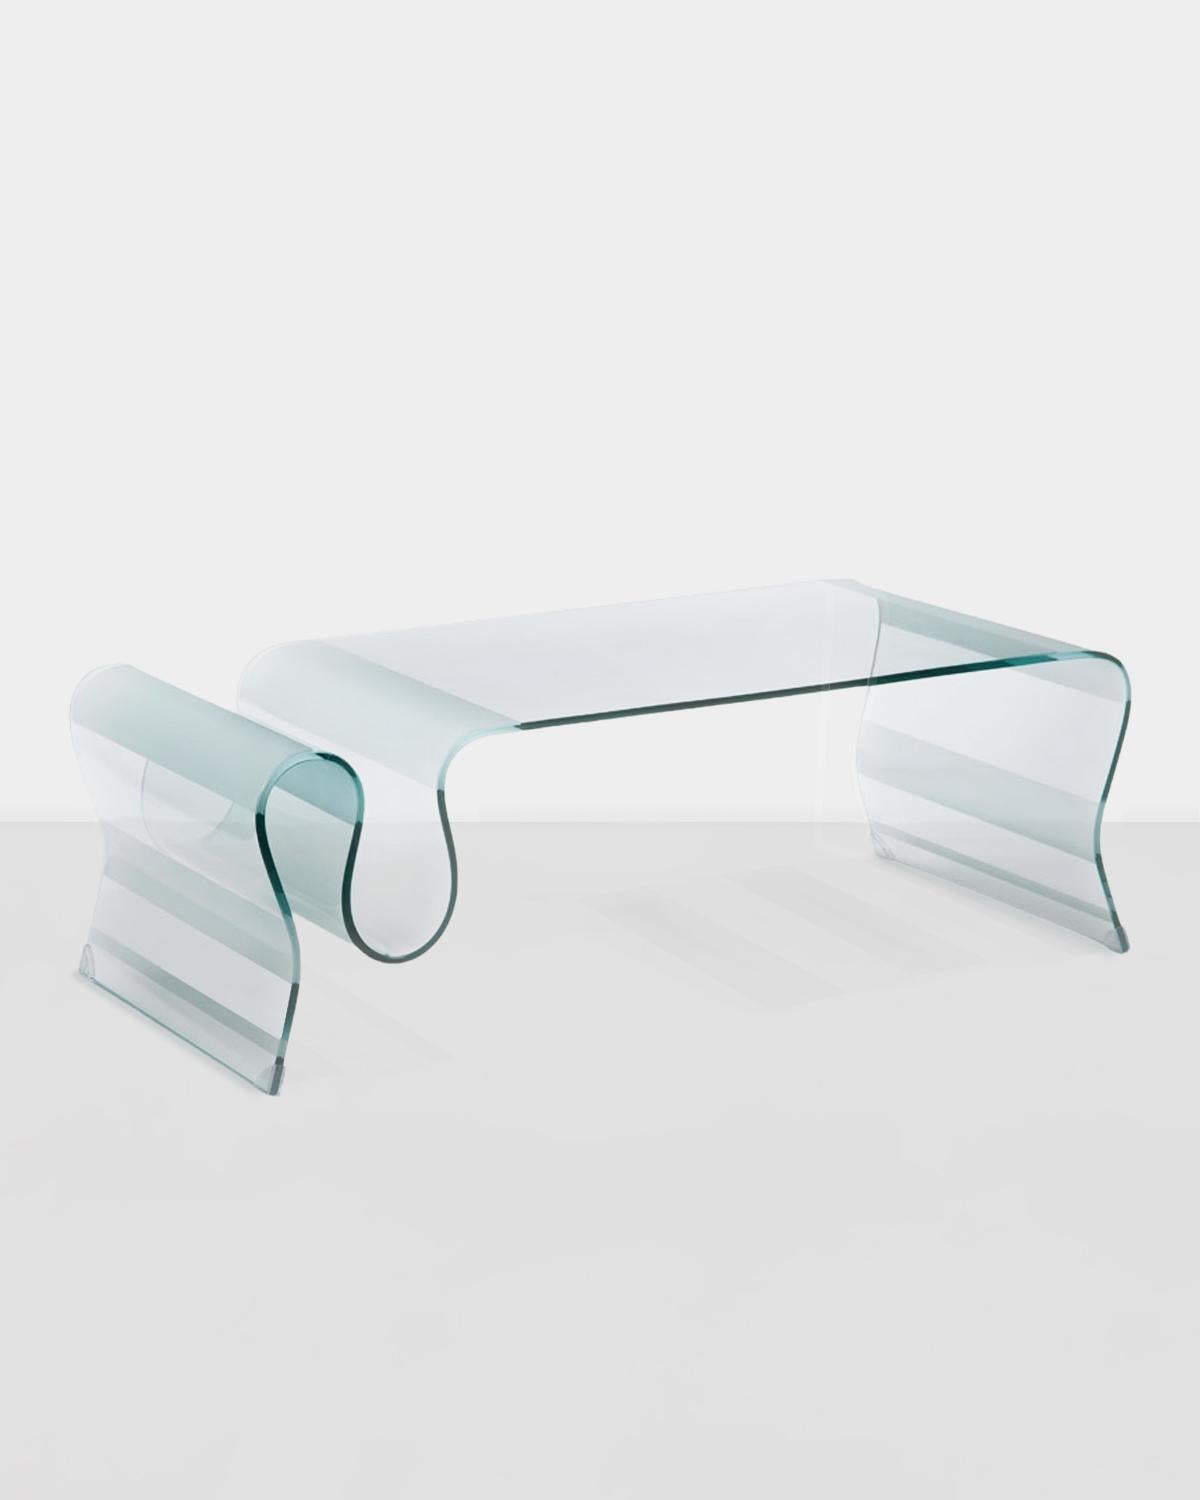 1980s Undulating Glass Coffee Table boasting subtle frosted accents. The wave portion of the table provides a classy and functional touch, creating the perfect storage space to house magazines, books and other accessories. A truly timeless and